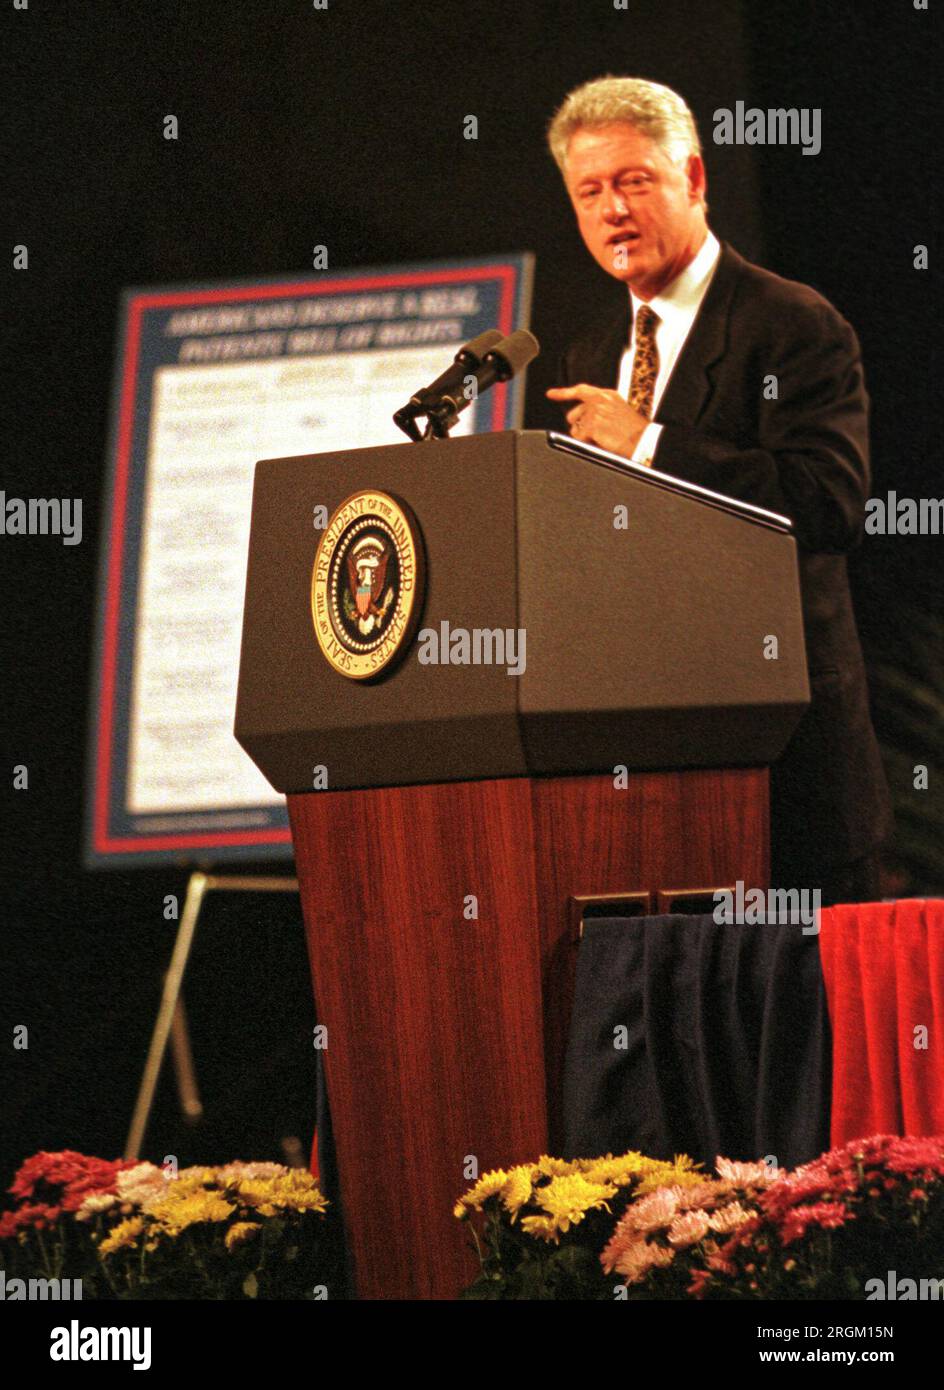 President Bill Clinton promotes his proposed 'patients' bill of rights' legislation during a visit to Kentucky on Monday, Aug. 10, 1998 at the Commonwealth Convention Center in Louisville, Jefferson County, KY, USA. Clinton attended a fundraiser luncheon for Democratic congressional candidate Scotty Baesler later in the day. (Apex MediaWire Photo by Billy Suratt) Stock Photo